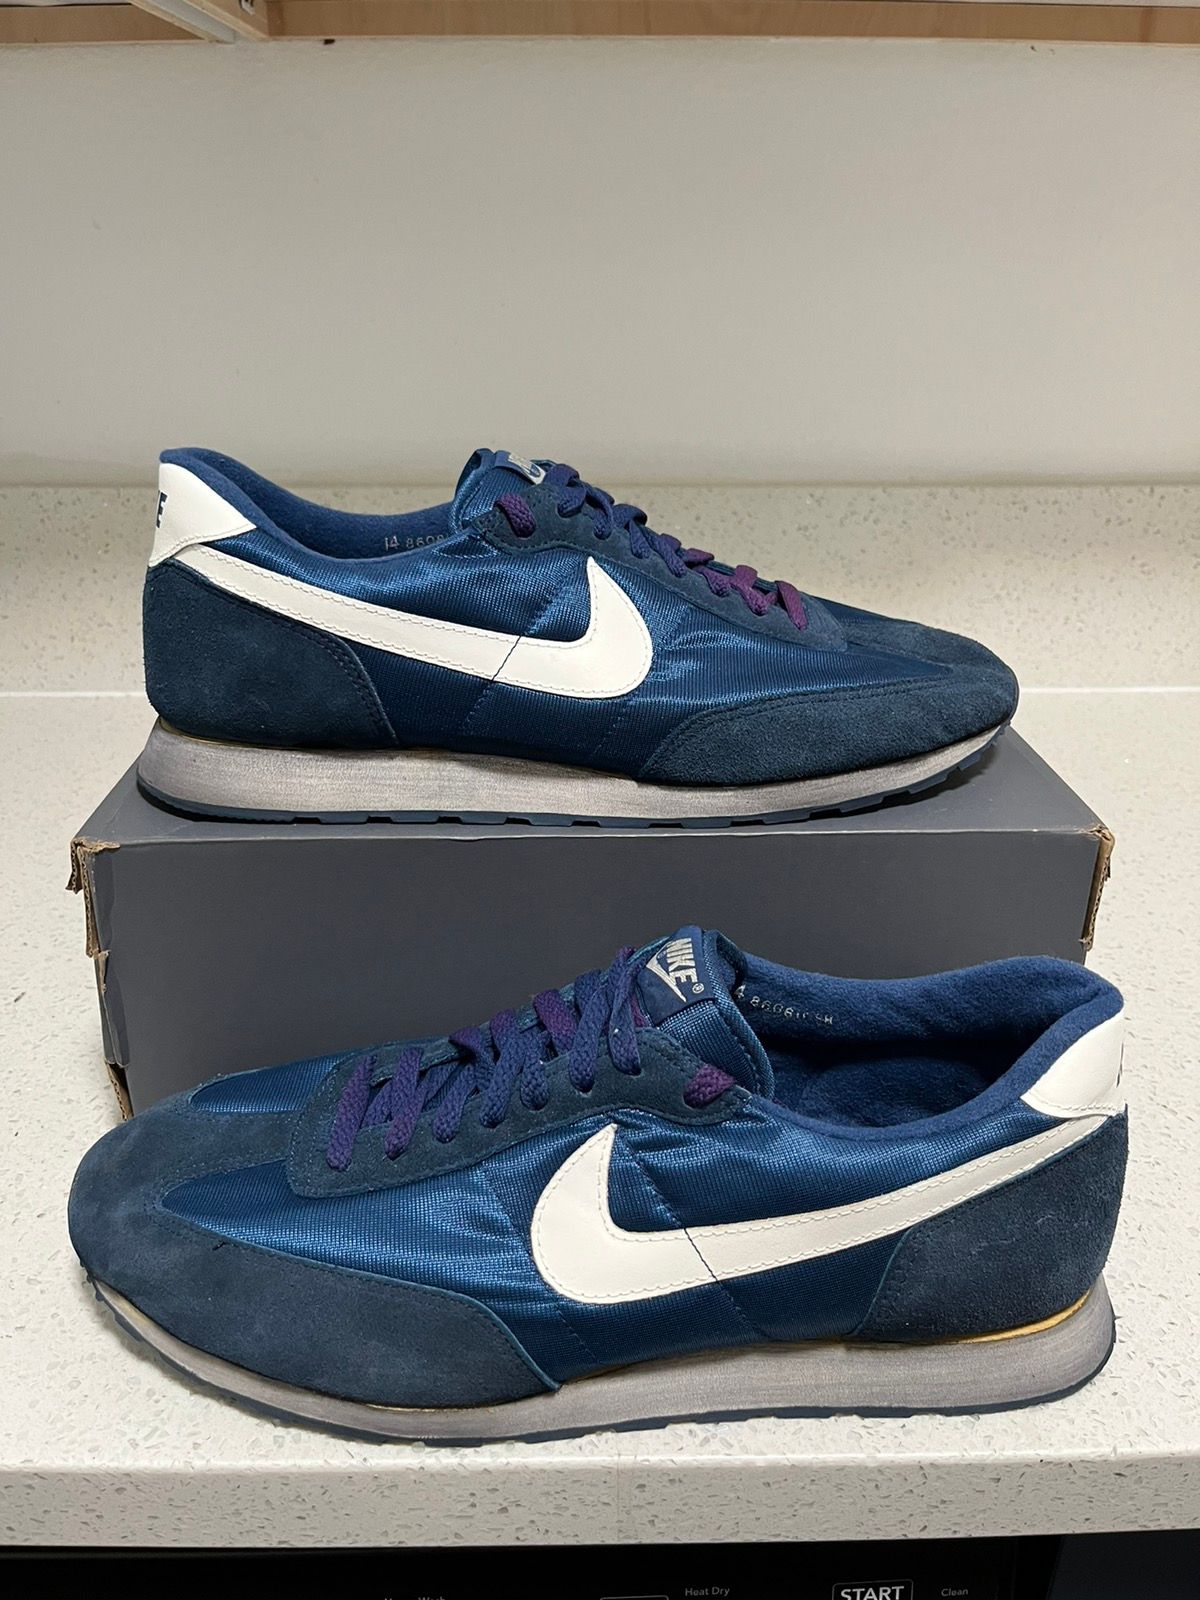 Nike Vintage 80s Nike Oceania 2 OG Running Shoes Sneakers Size 14 Size US 14 / EU 47 - 1 Preview